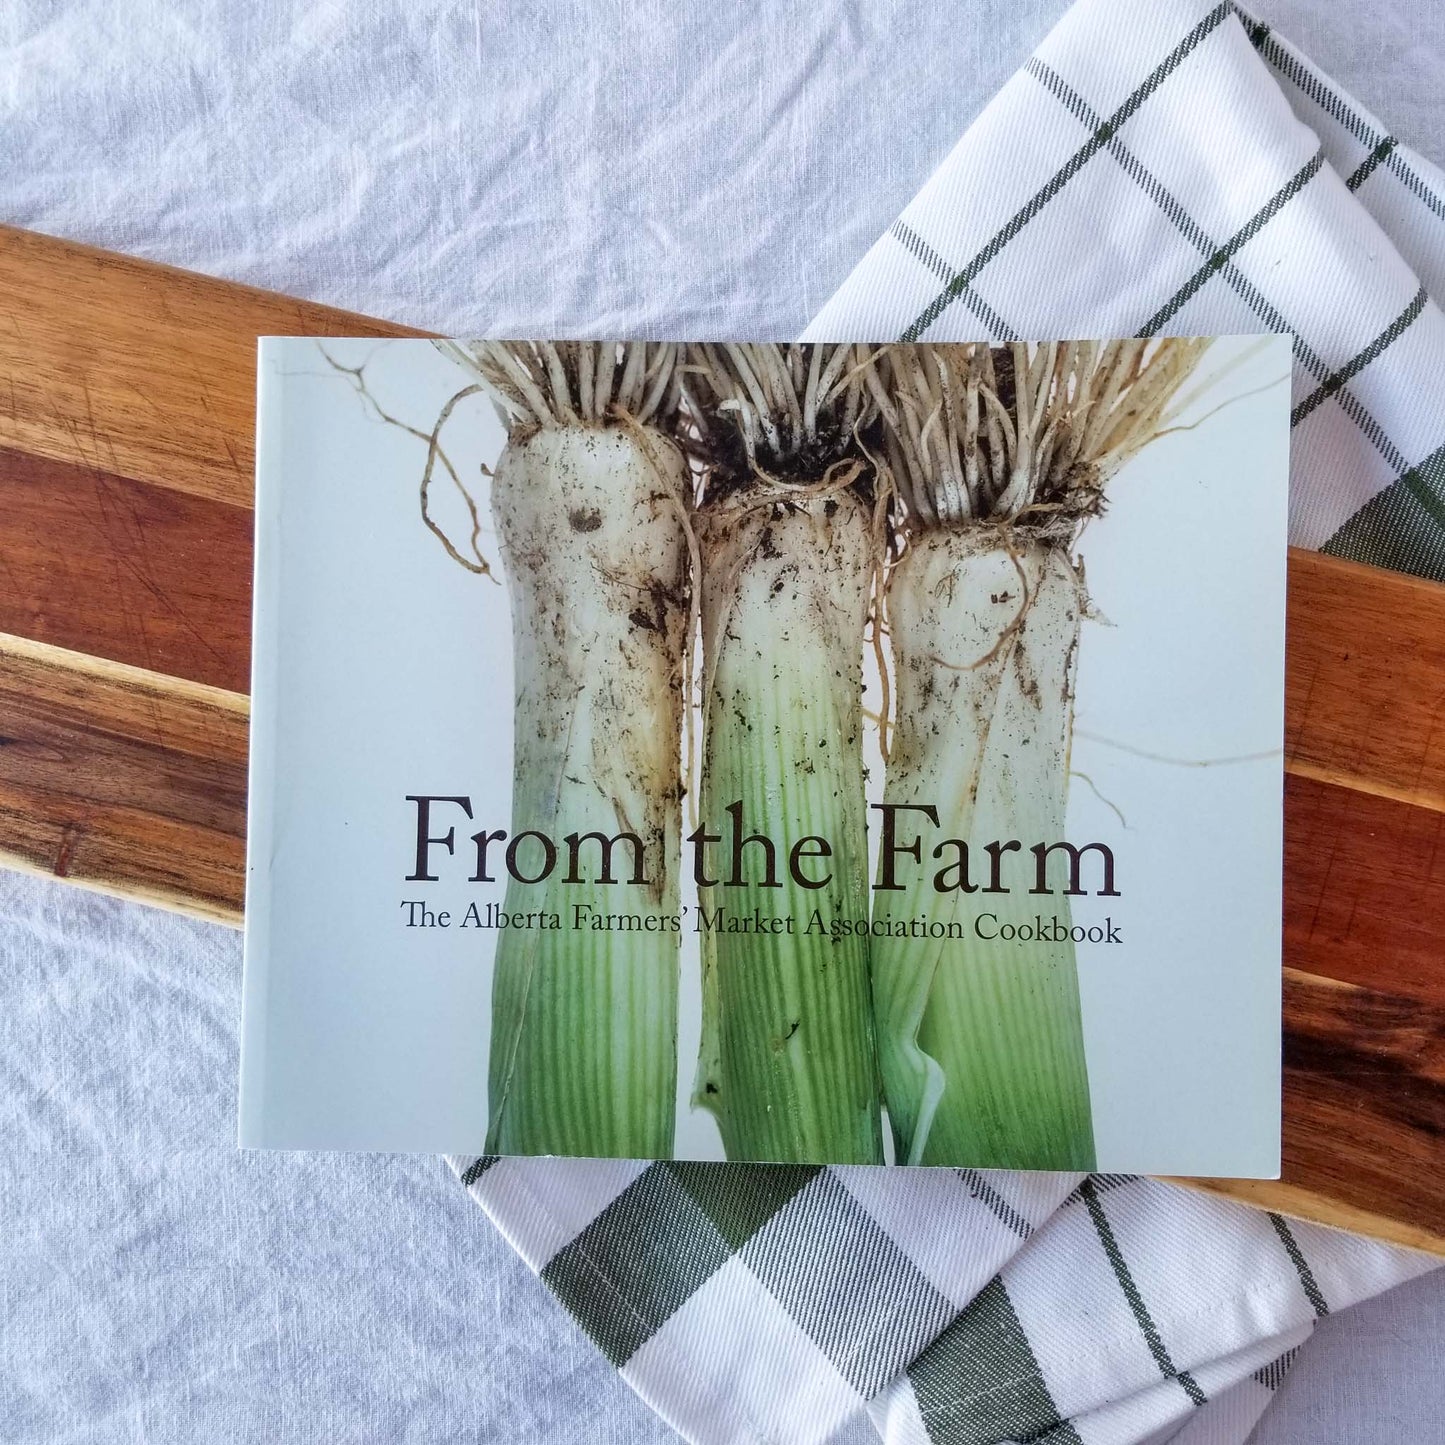 From the Farm cookbook